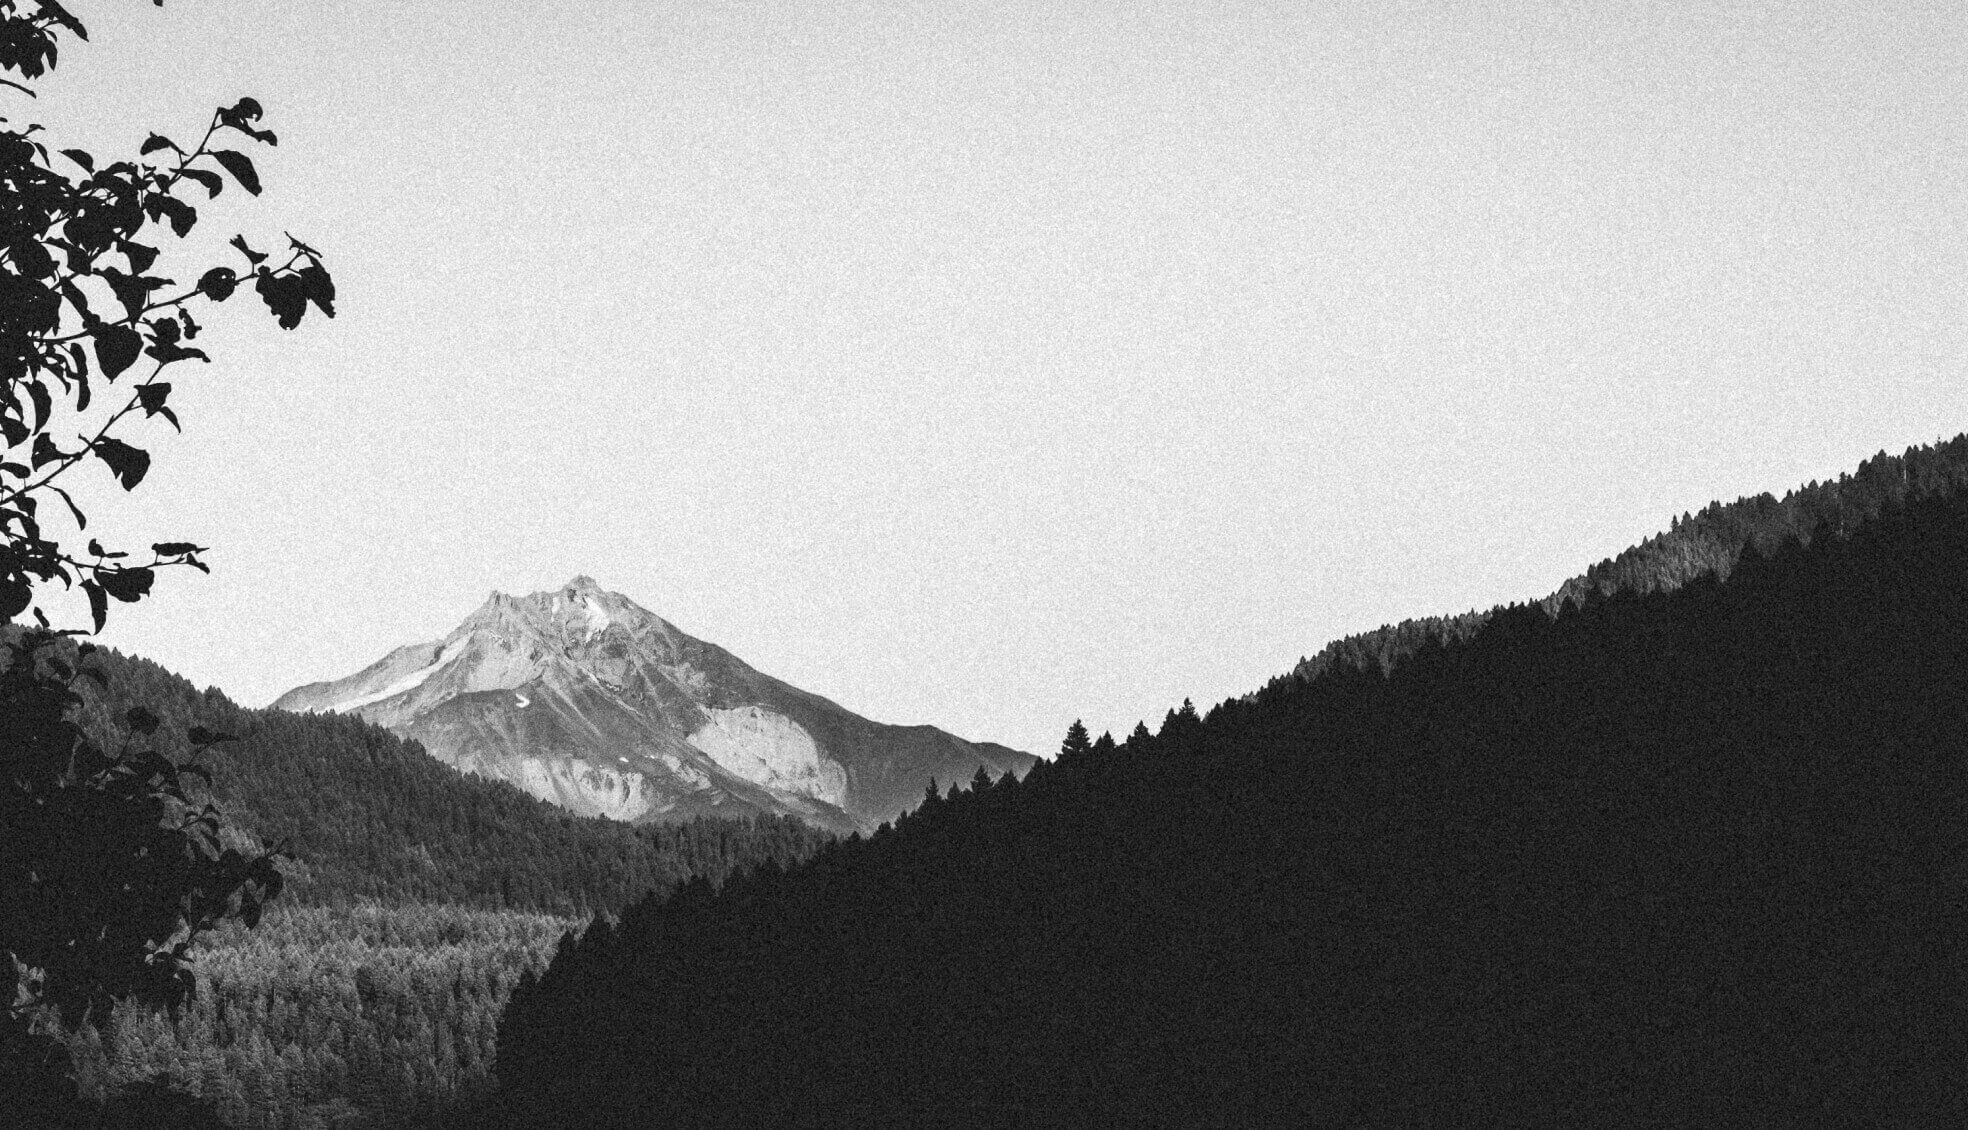 Greyscale picture with dark, tree covered mountain in the foreground while a snowy mountain is in the background